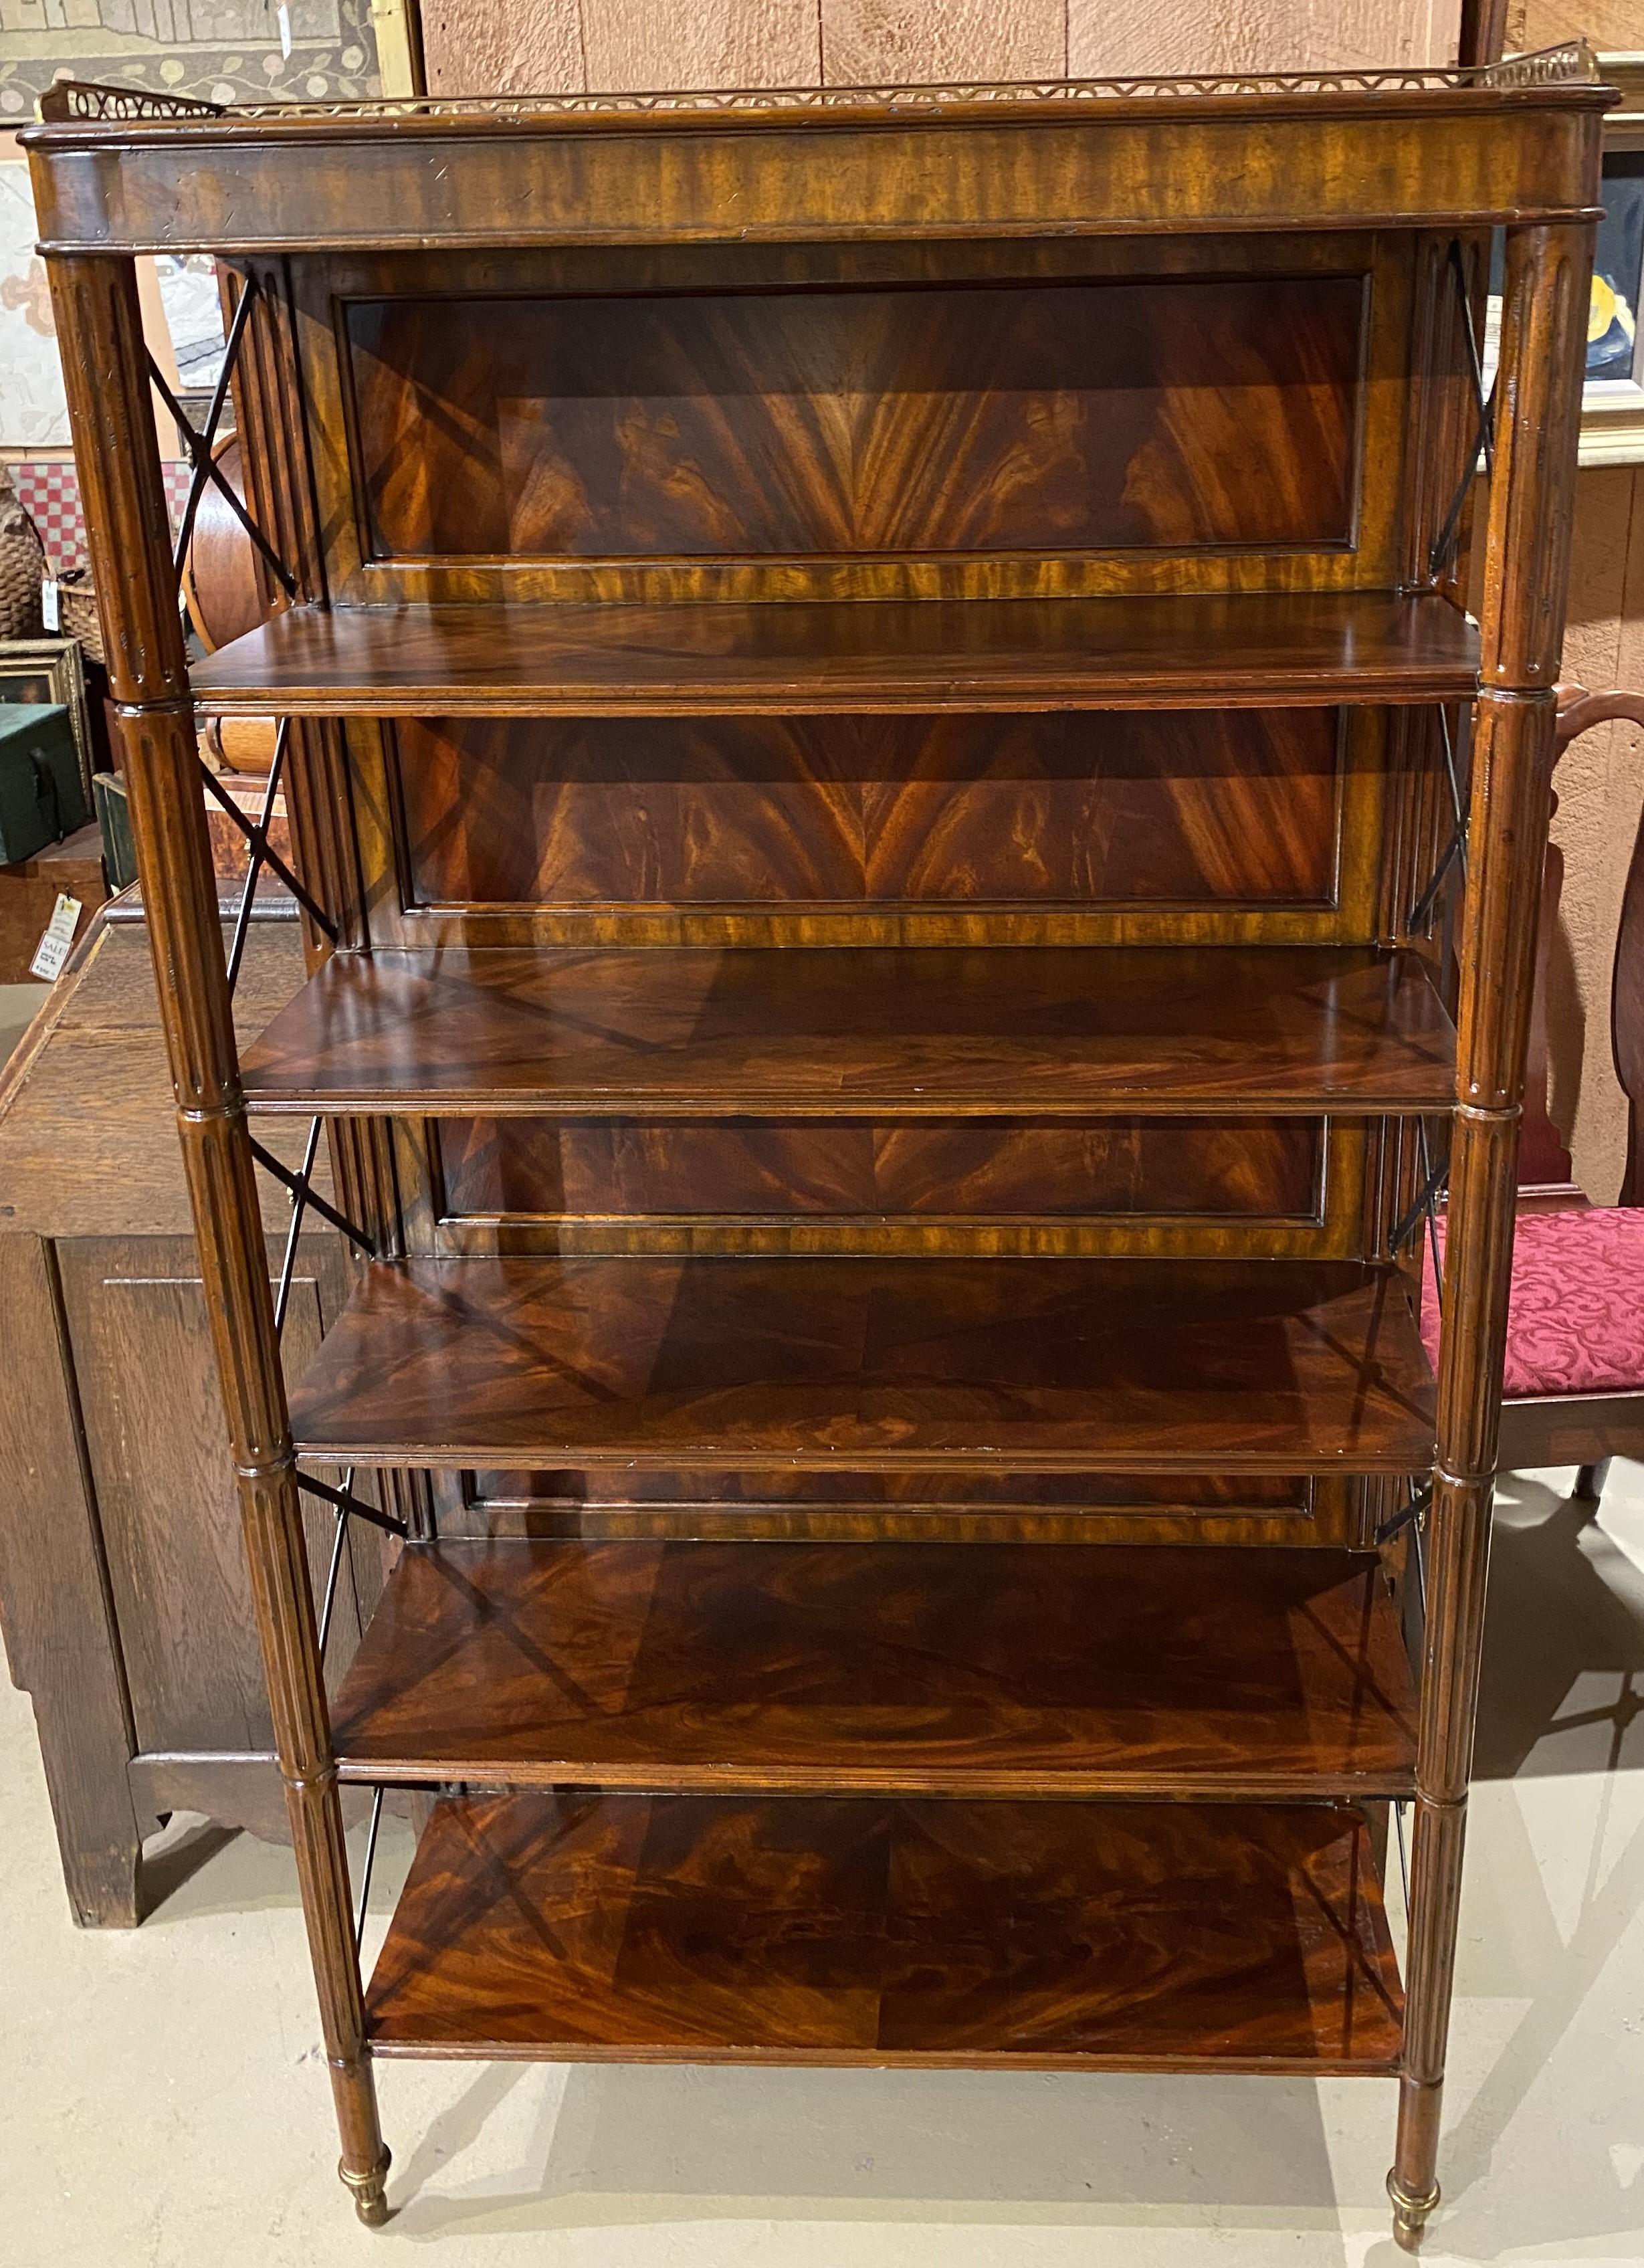 A fine Maitland Smith étagère or bookcase with five shelves, book matched flame mahogany back veneers with crossbanded borders, small top brass gallery, ebonized metal cross shelf end supports with brass rosettes, reeded front corner legs with brass